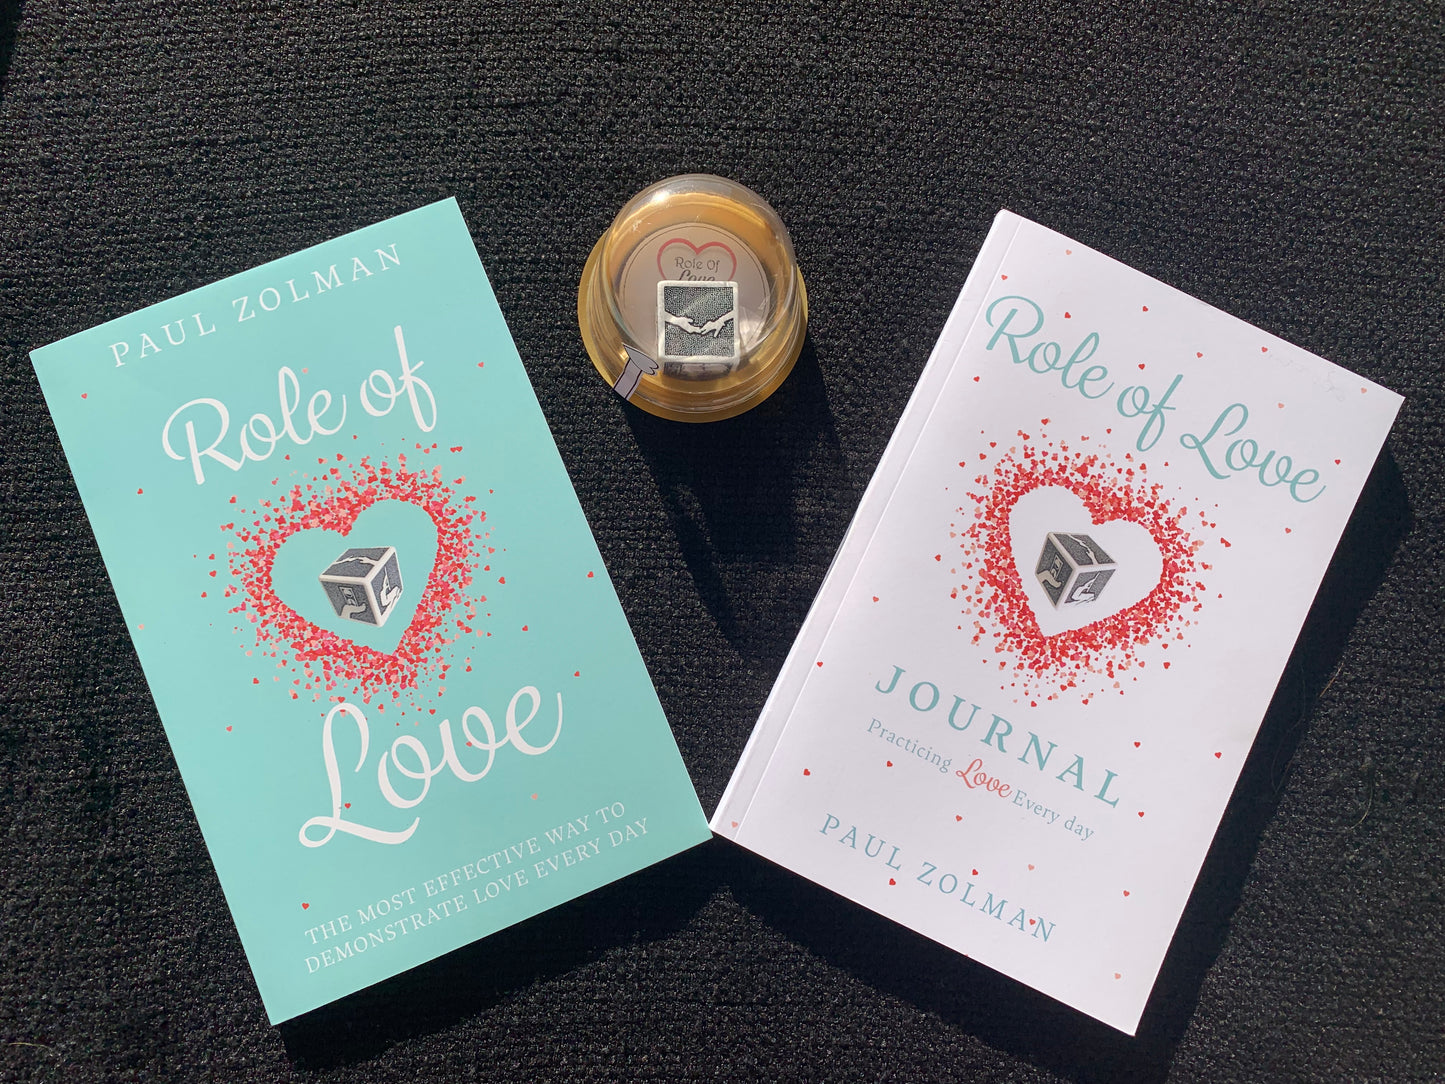 role of love bundle with book, cube and journal